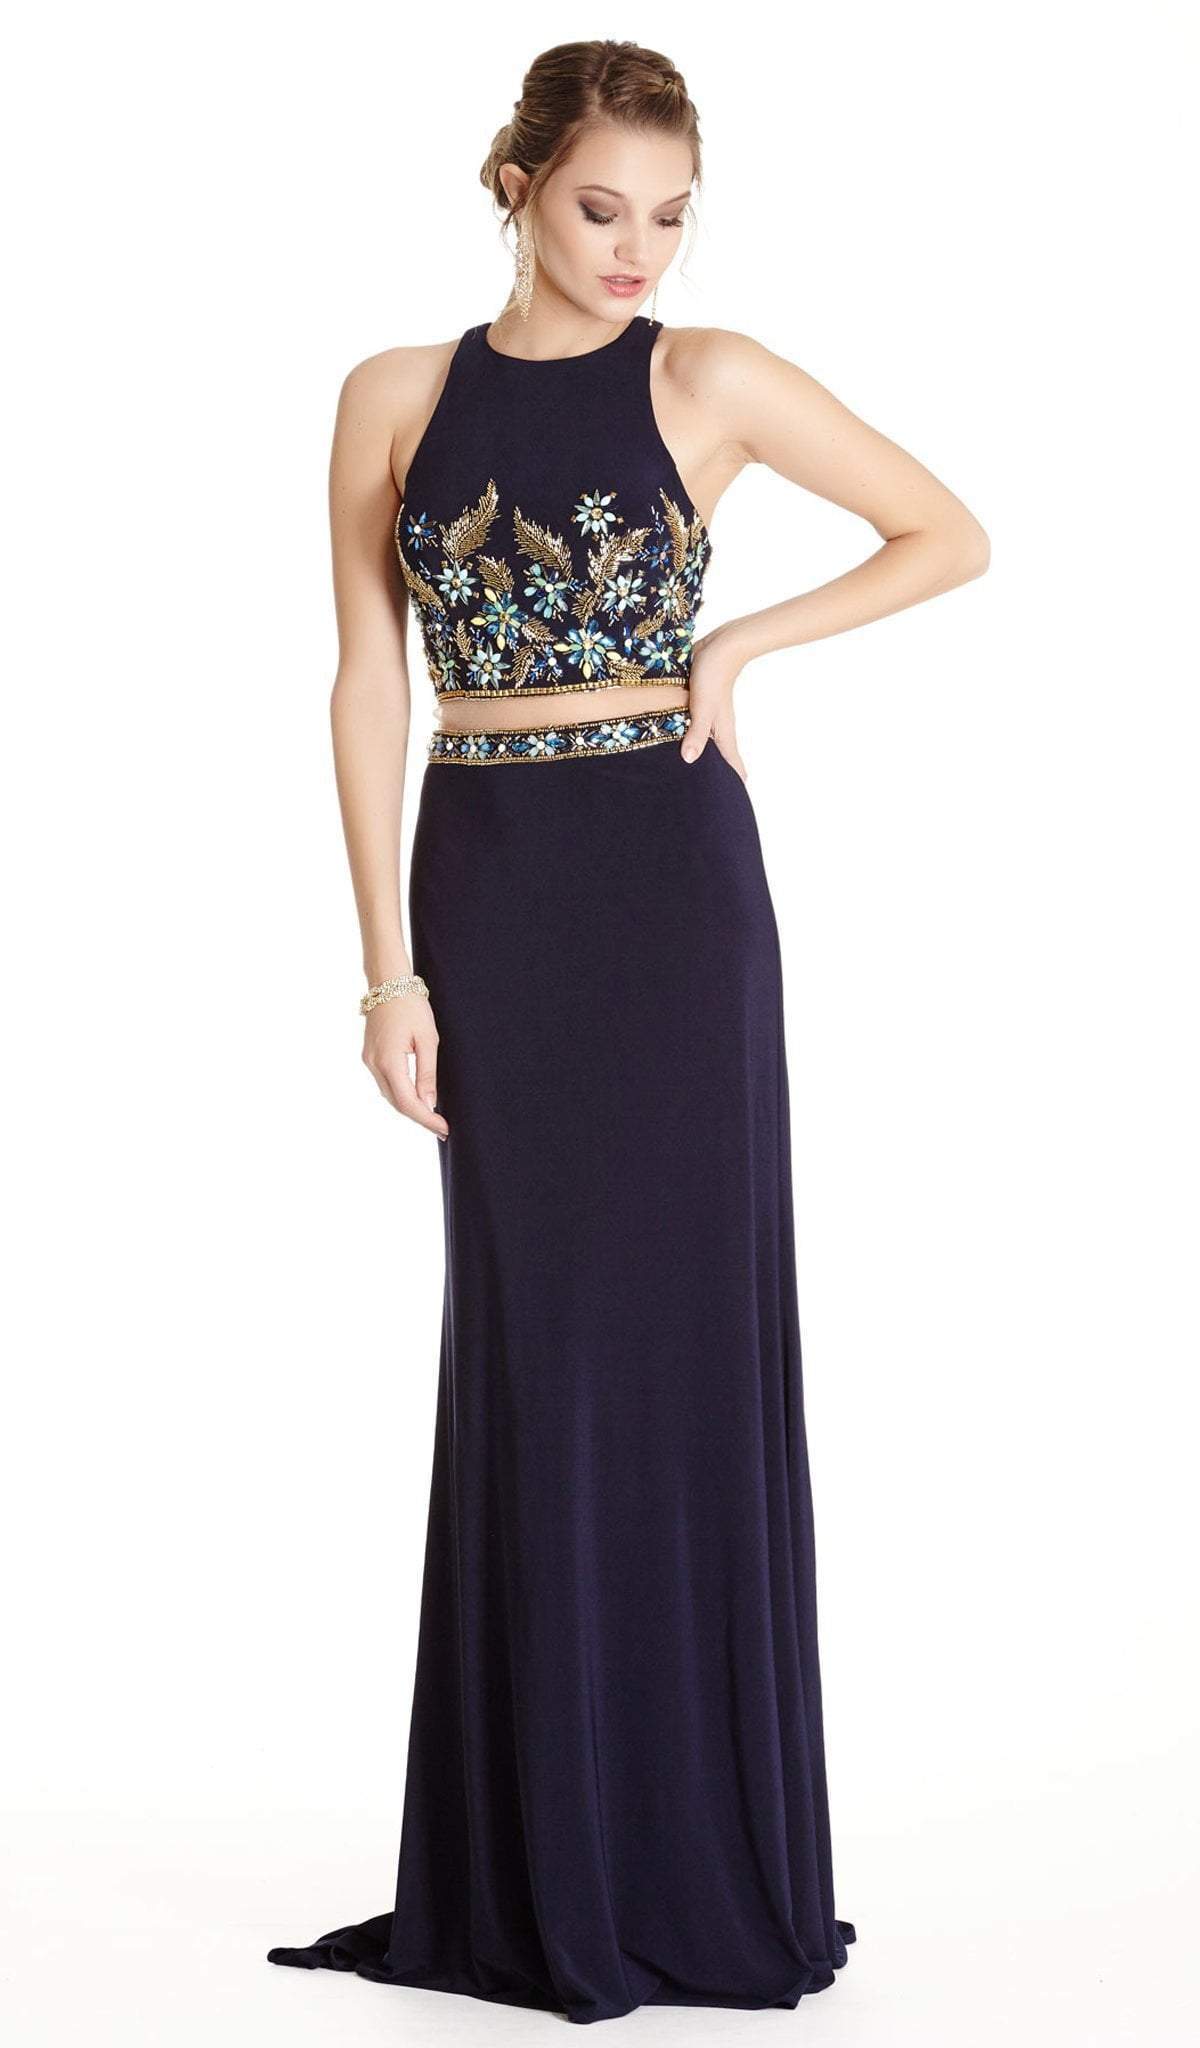 Image of Aspeed Design - Two Piece Embroidered Halter Sheath Prom Dress